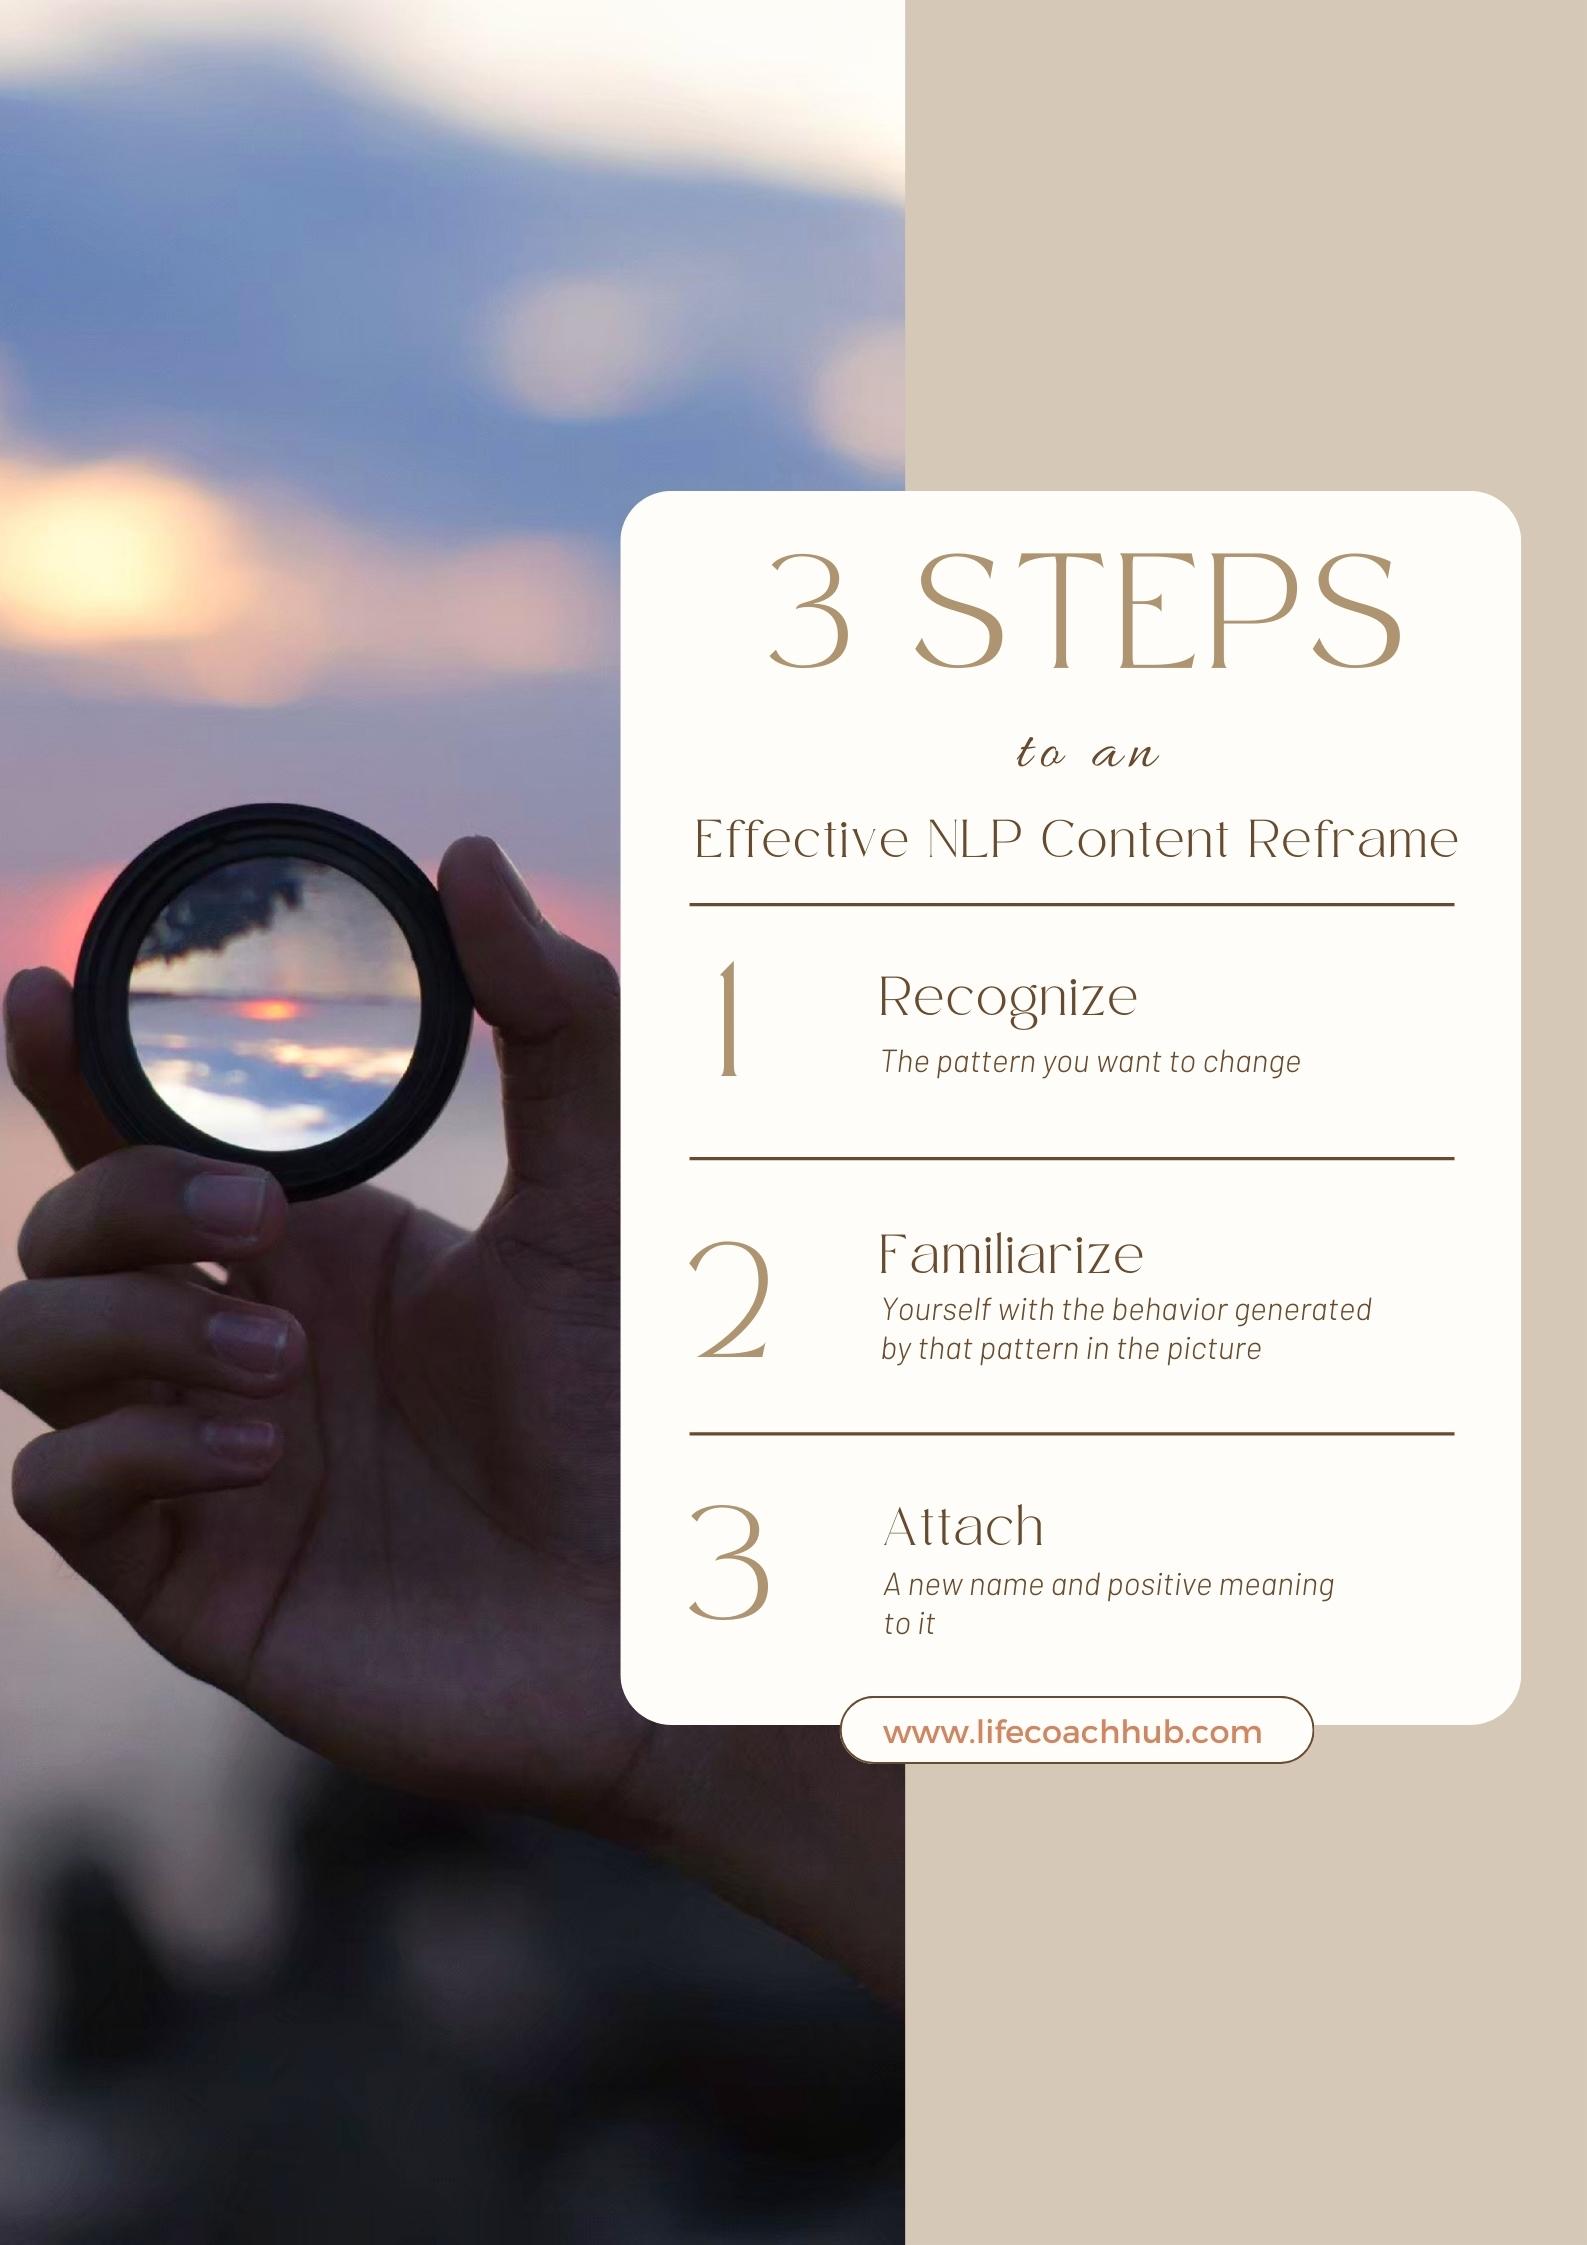 3 Steps to perform NLP content reframe